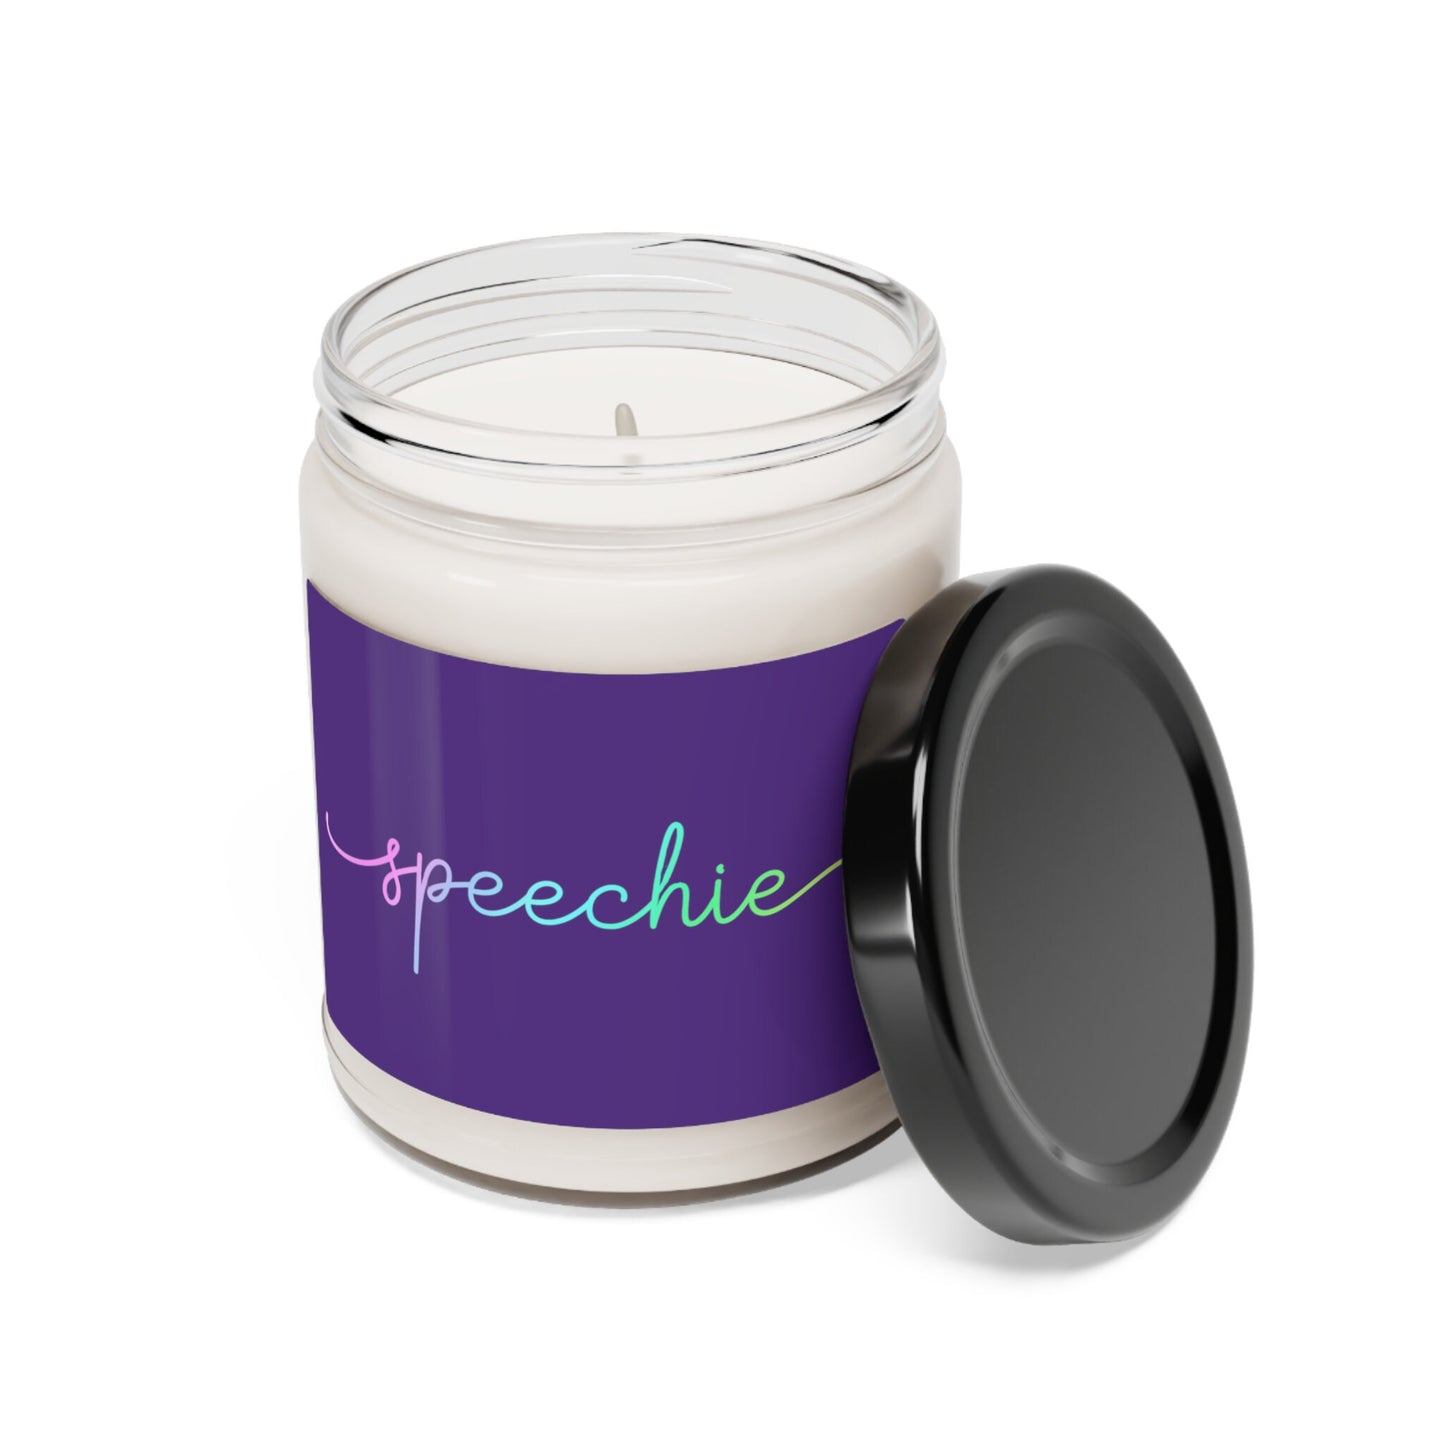 Speechie Minimalist Scented Soy Candle, 9 oz